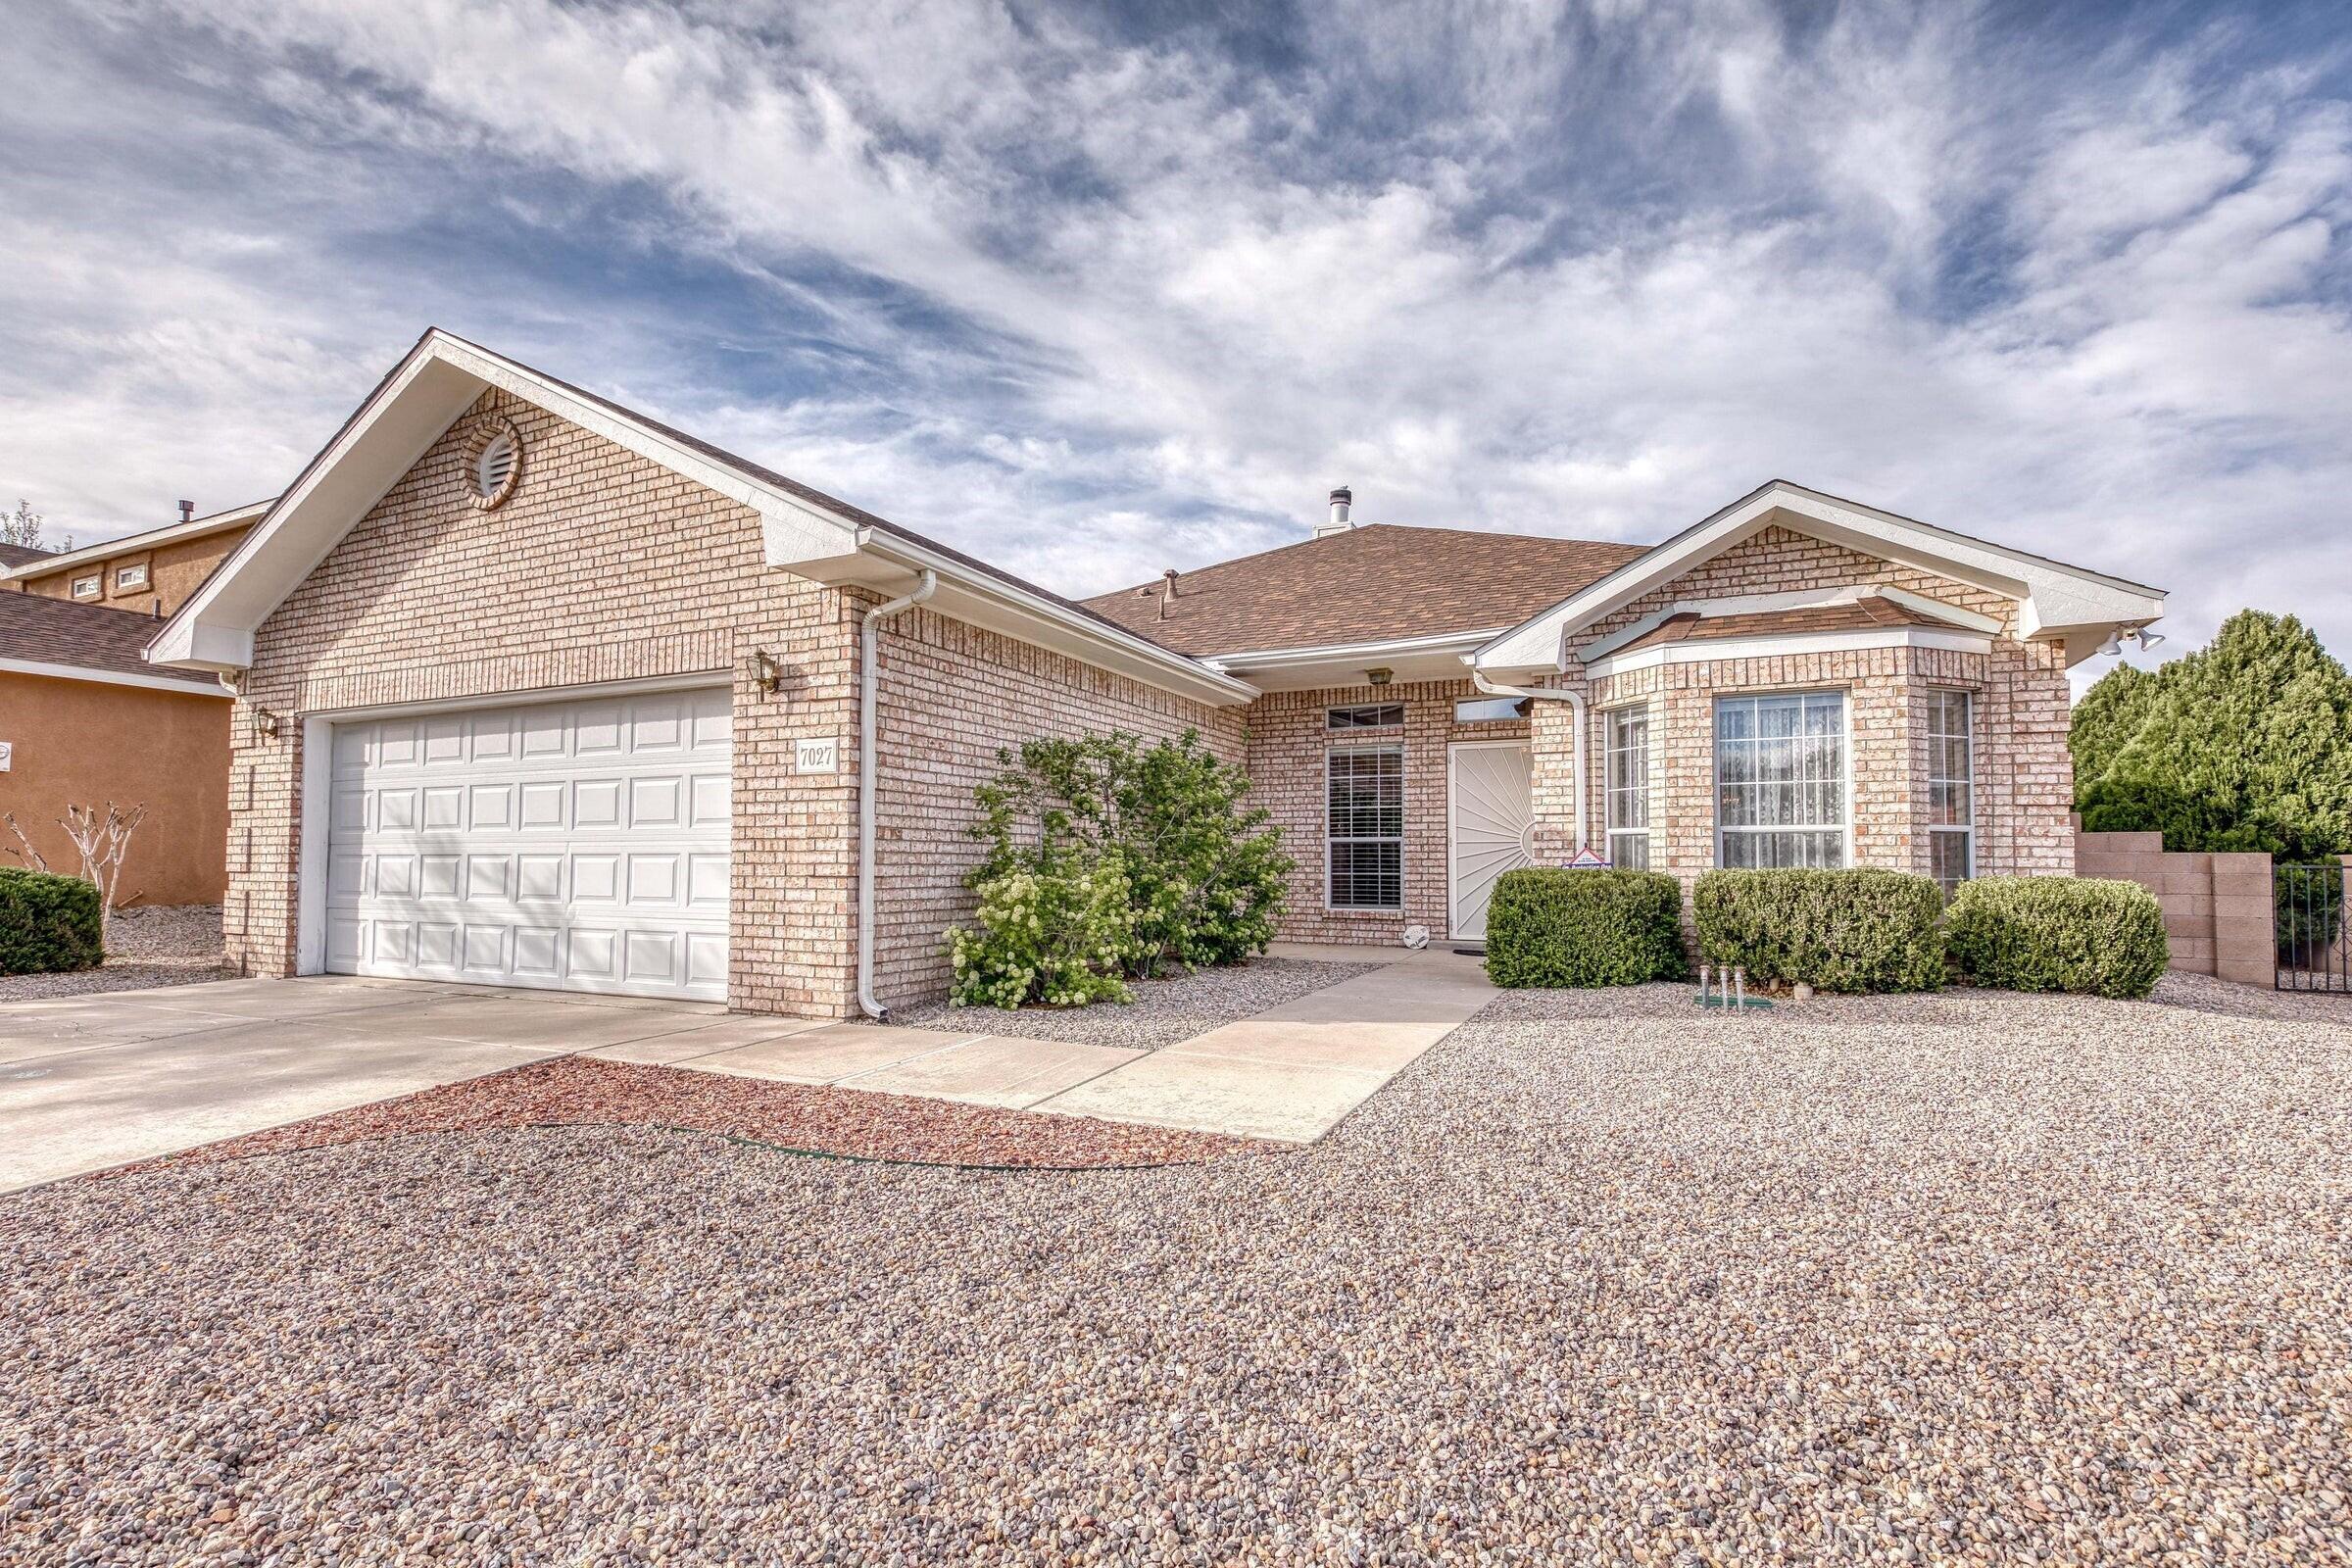 Single story in Ventana Ranch. Seller Updates:  Back patio addition, Evaporative to Central refrigerated air conversion, Gas insert for fireplace, added fourth bedroom, and replace microwave. Washer/Dryer to stay.  Seller is willing to offer a carpeting allowance as a credit at closing